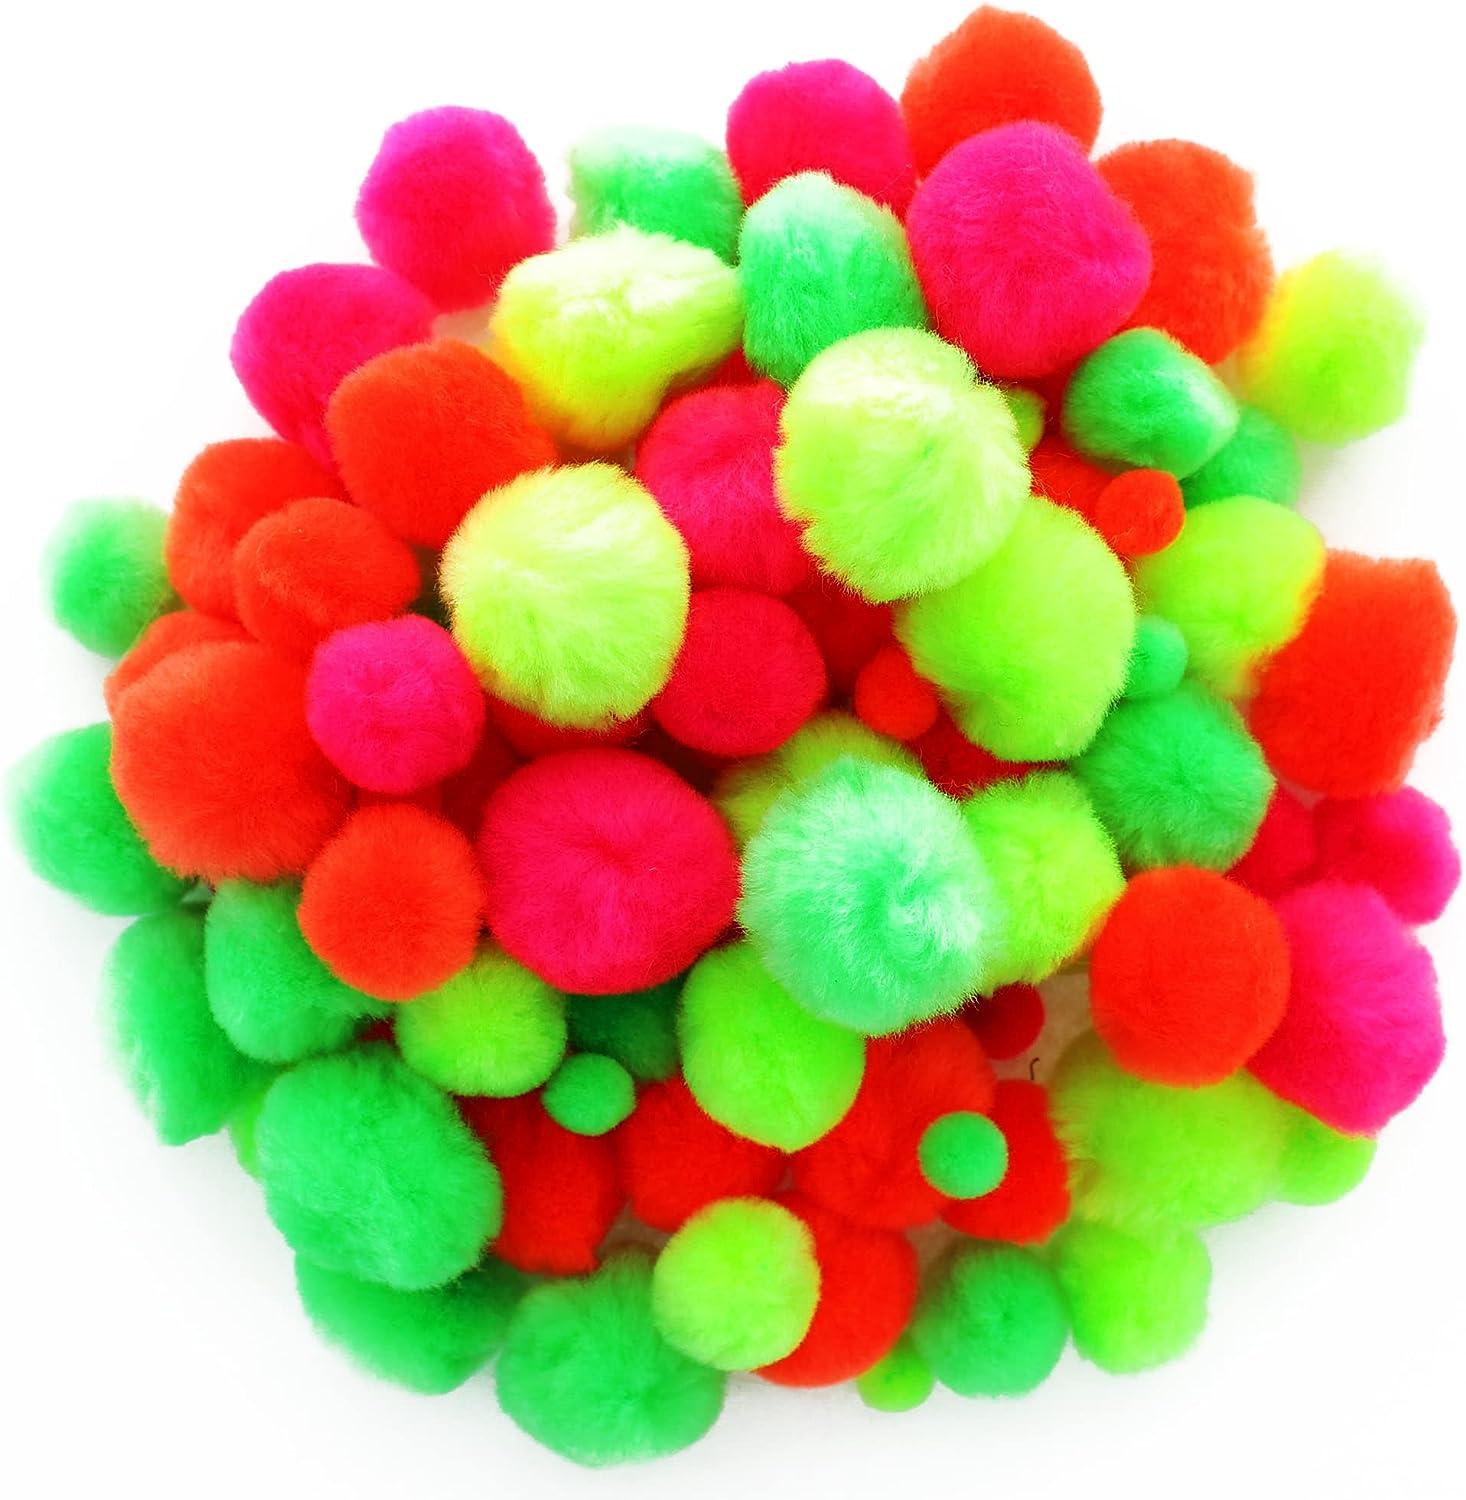 Essentials by Leisure Arts Pom Poms - Red - 3mm - 100 piece pom poms arts  and crafts - red pompoms for crafts - craft pom poms - puff balls for  crafts 